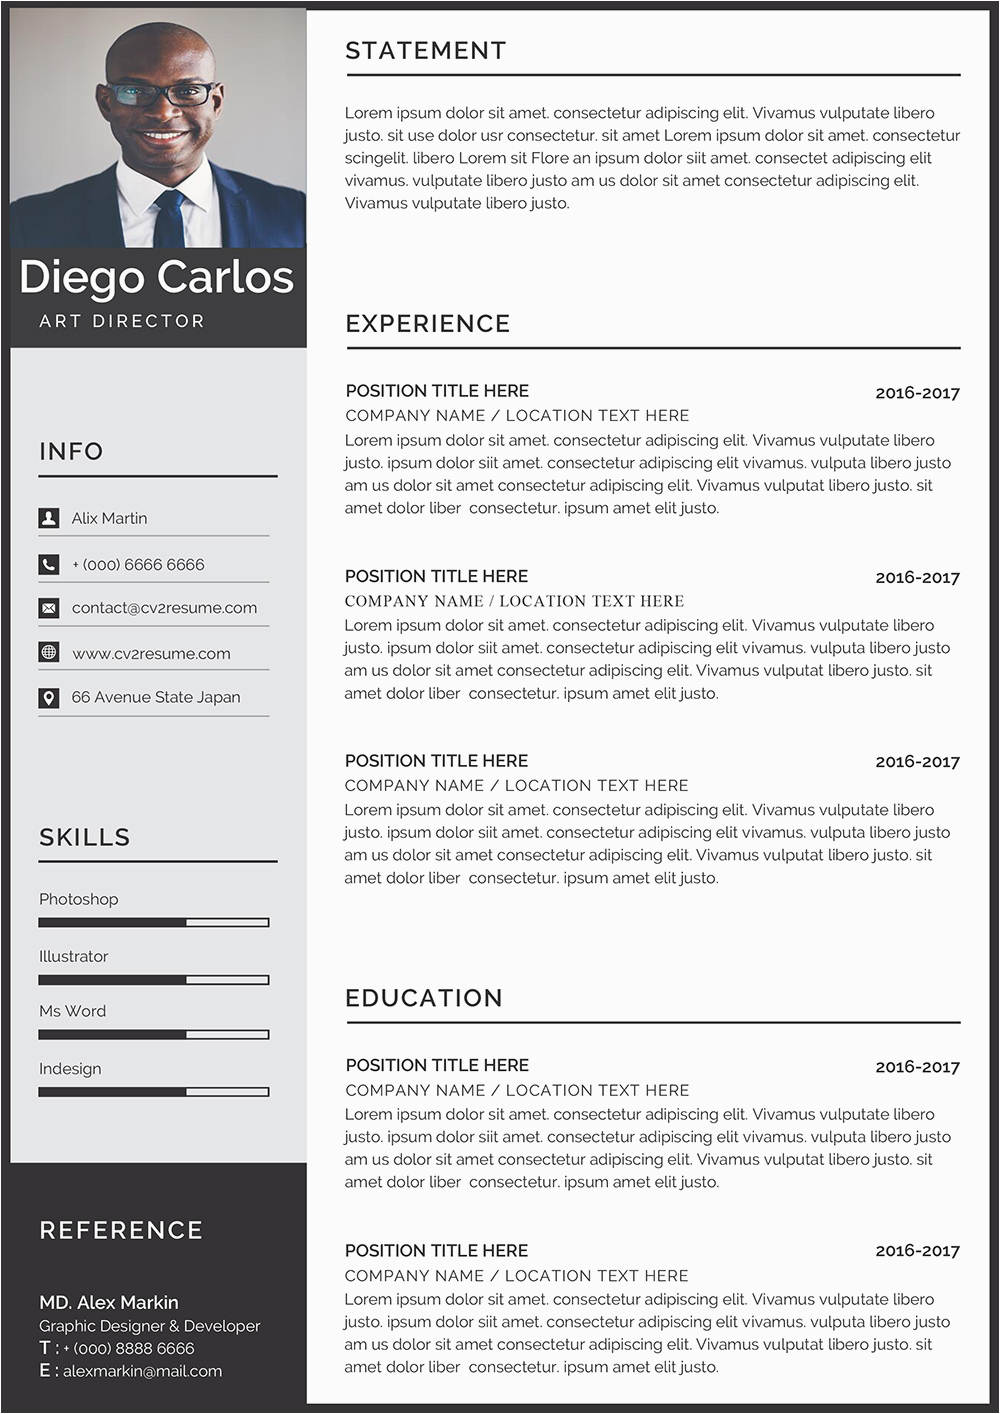 Free Resume Templates for It Professionals Modern Minimalist Resume Template Download Professional